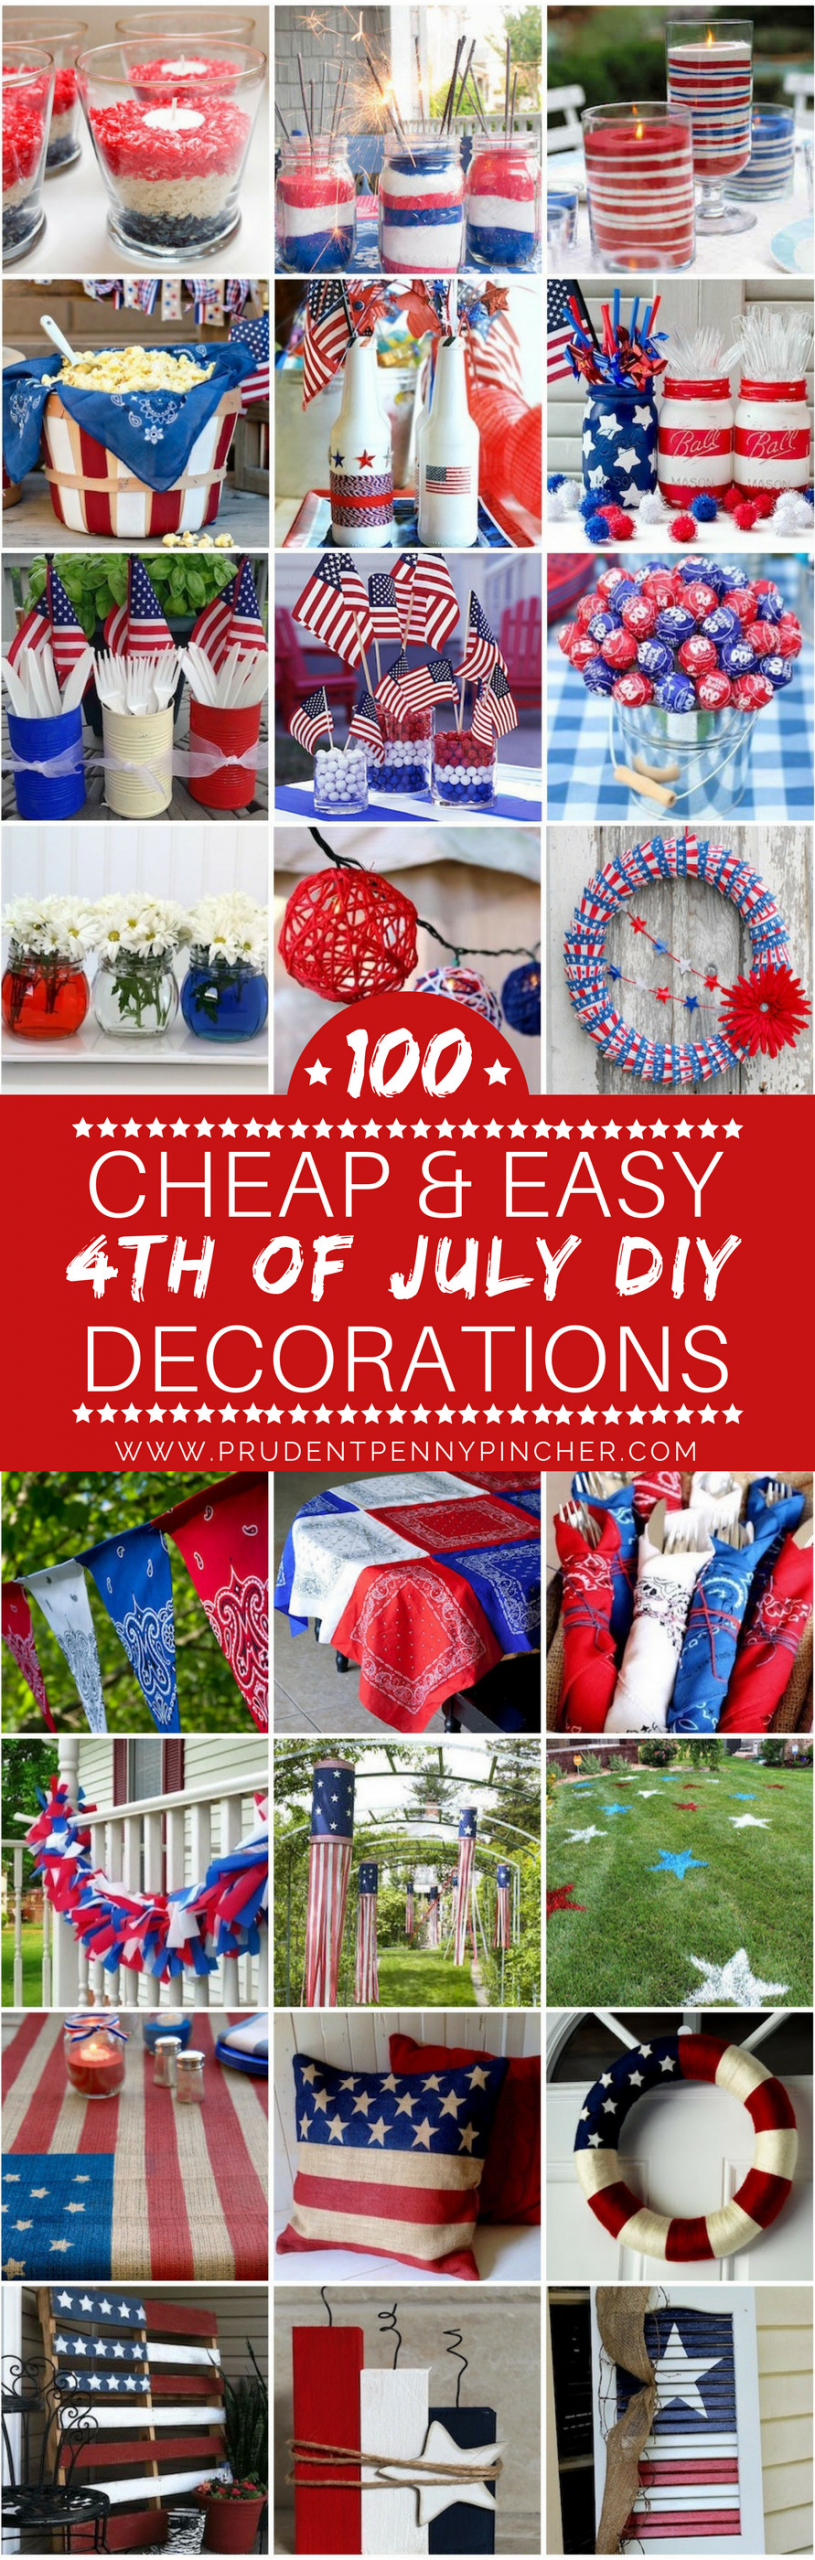 4th Of July Party Decorating Ideas
 100 Cheap and Easy DIY 4th of July Decorations